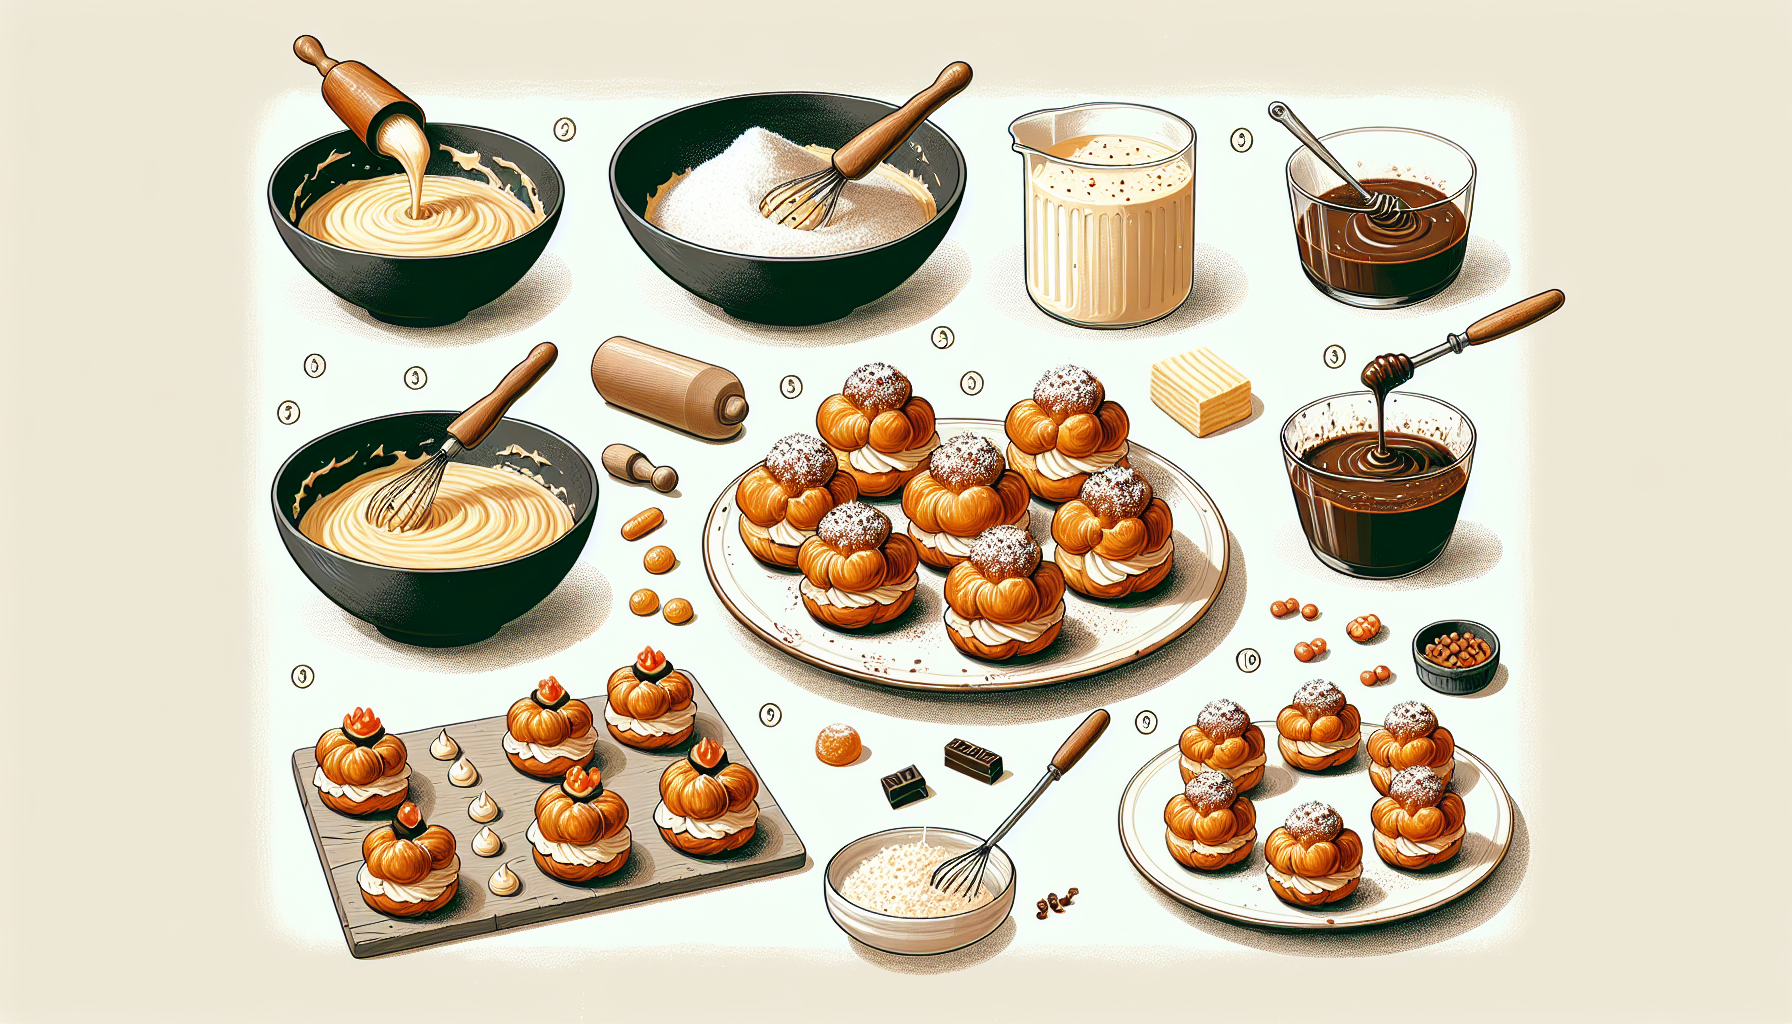 how do you prepare profiteroles at home and what creative fillings do you recommend